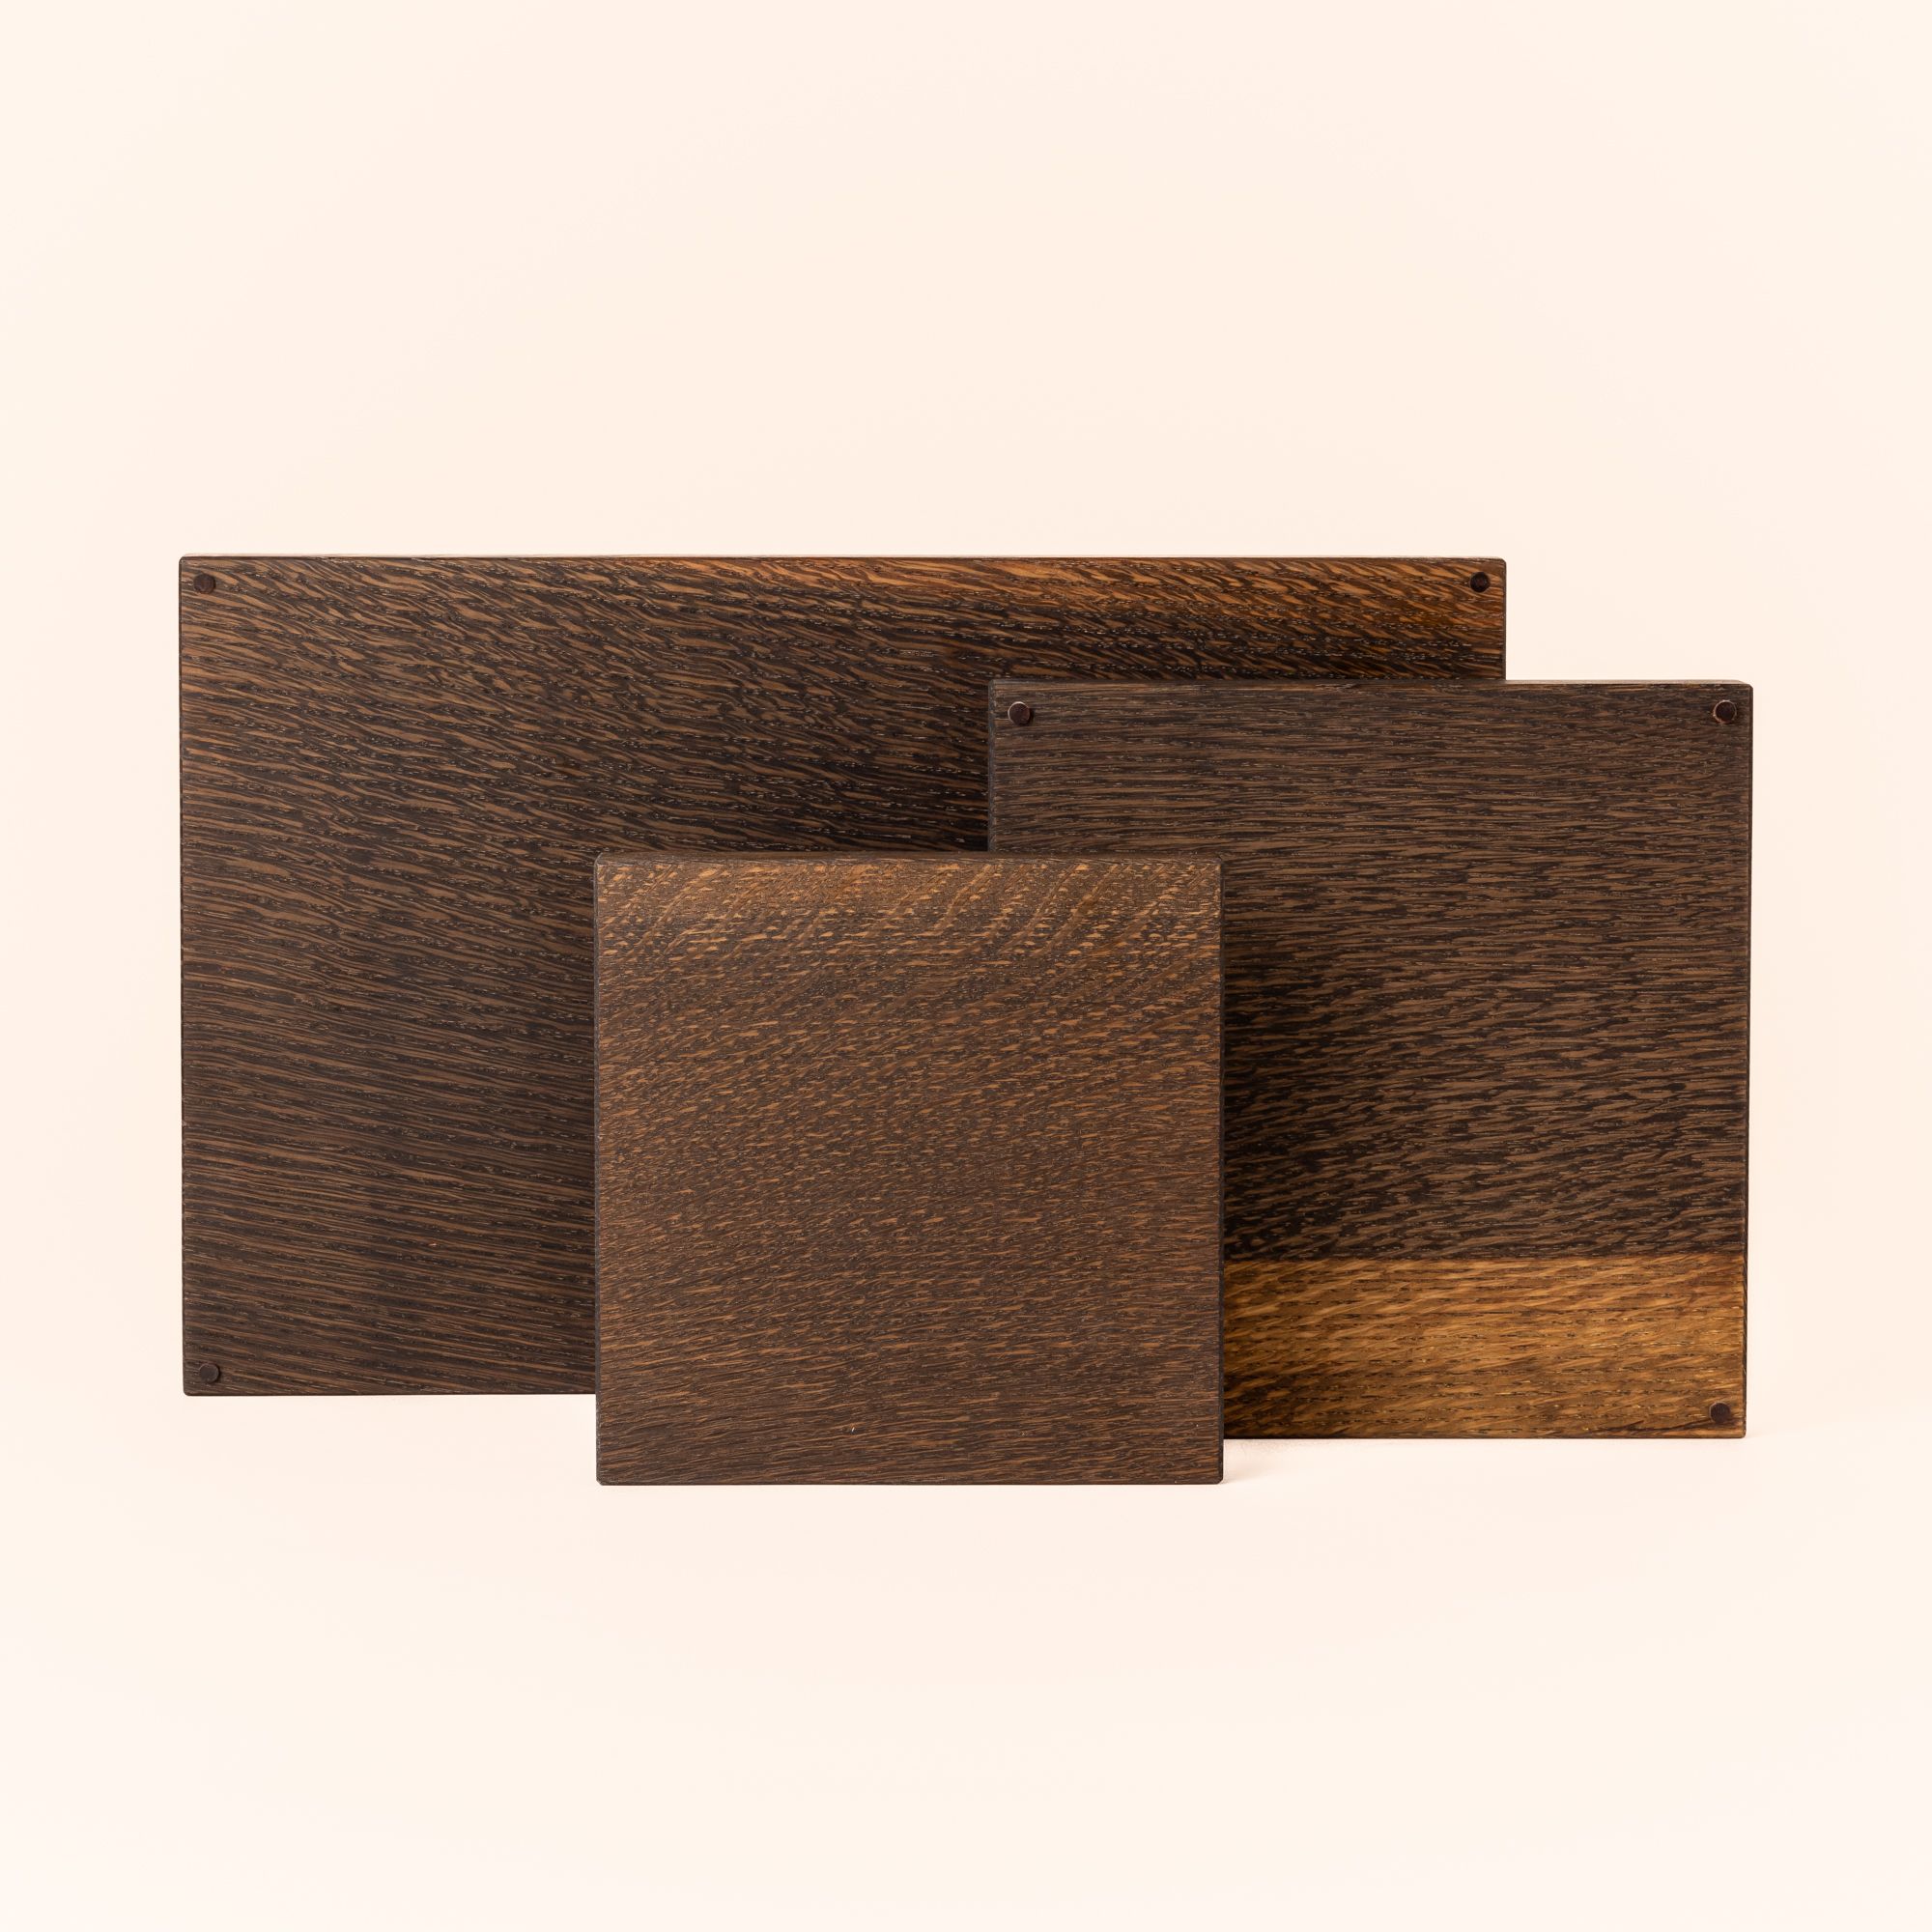 Three oak cutting boards of varying sizes in an ebonized stain